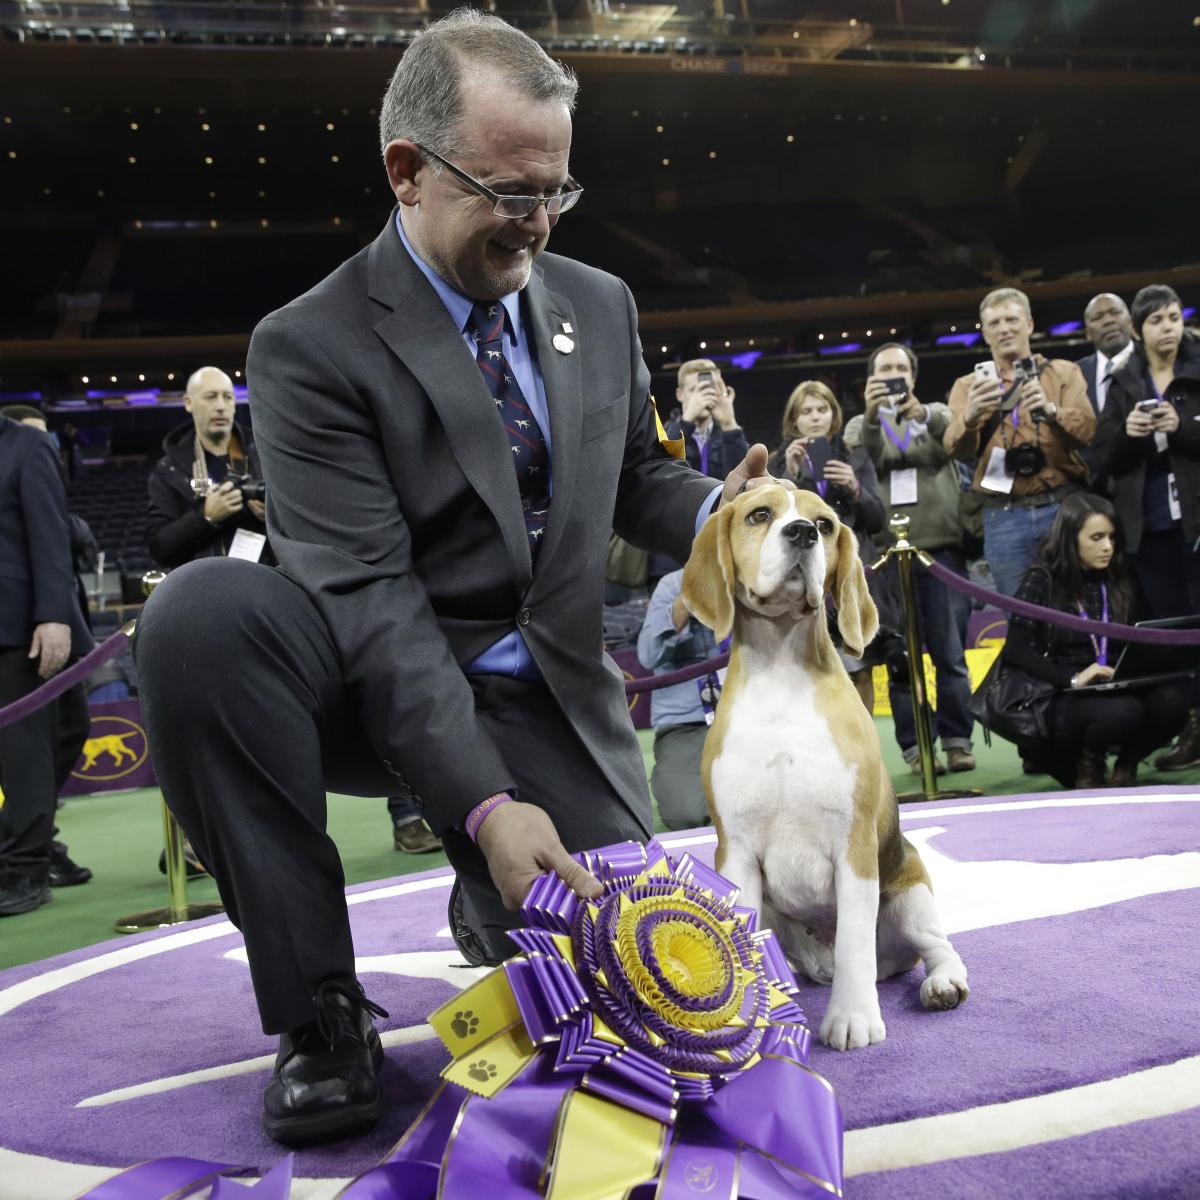 Westminster Dog Show 2015 Results: Best of Breed Winners and Day 2 Recap | Bleacher ...